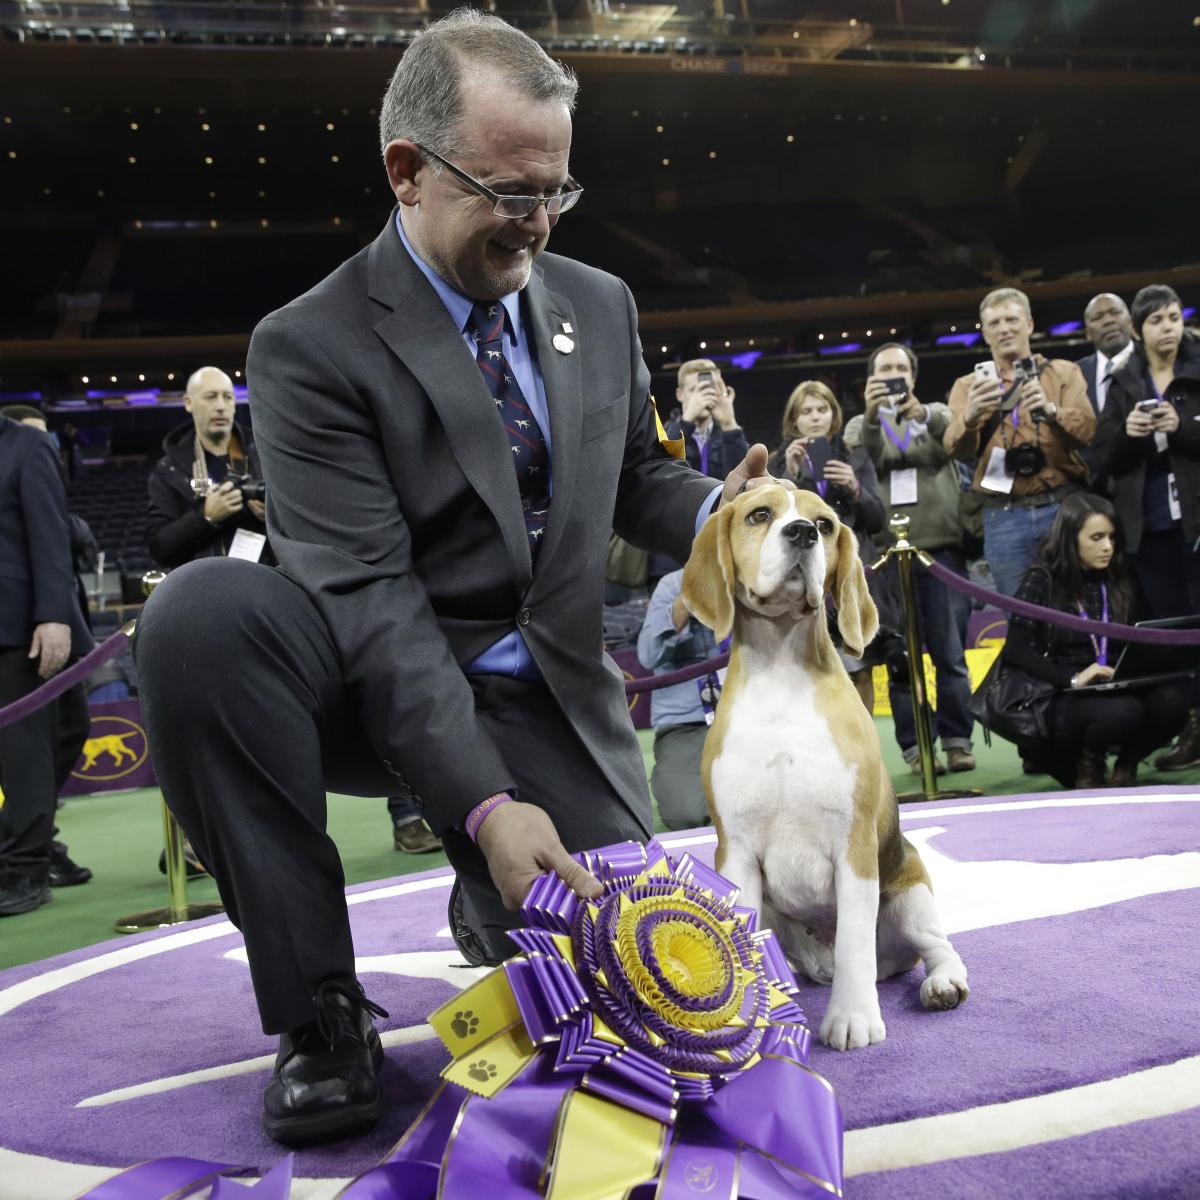 Westminster Dog Show 2015 Results: Best of Breed Winners and Day 2 Recap | Bleacher ...